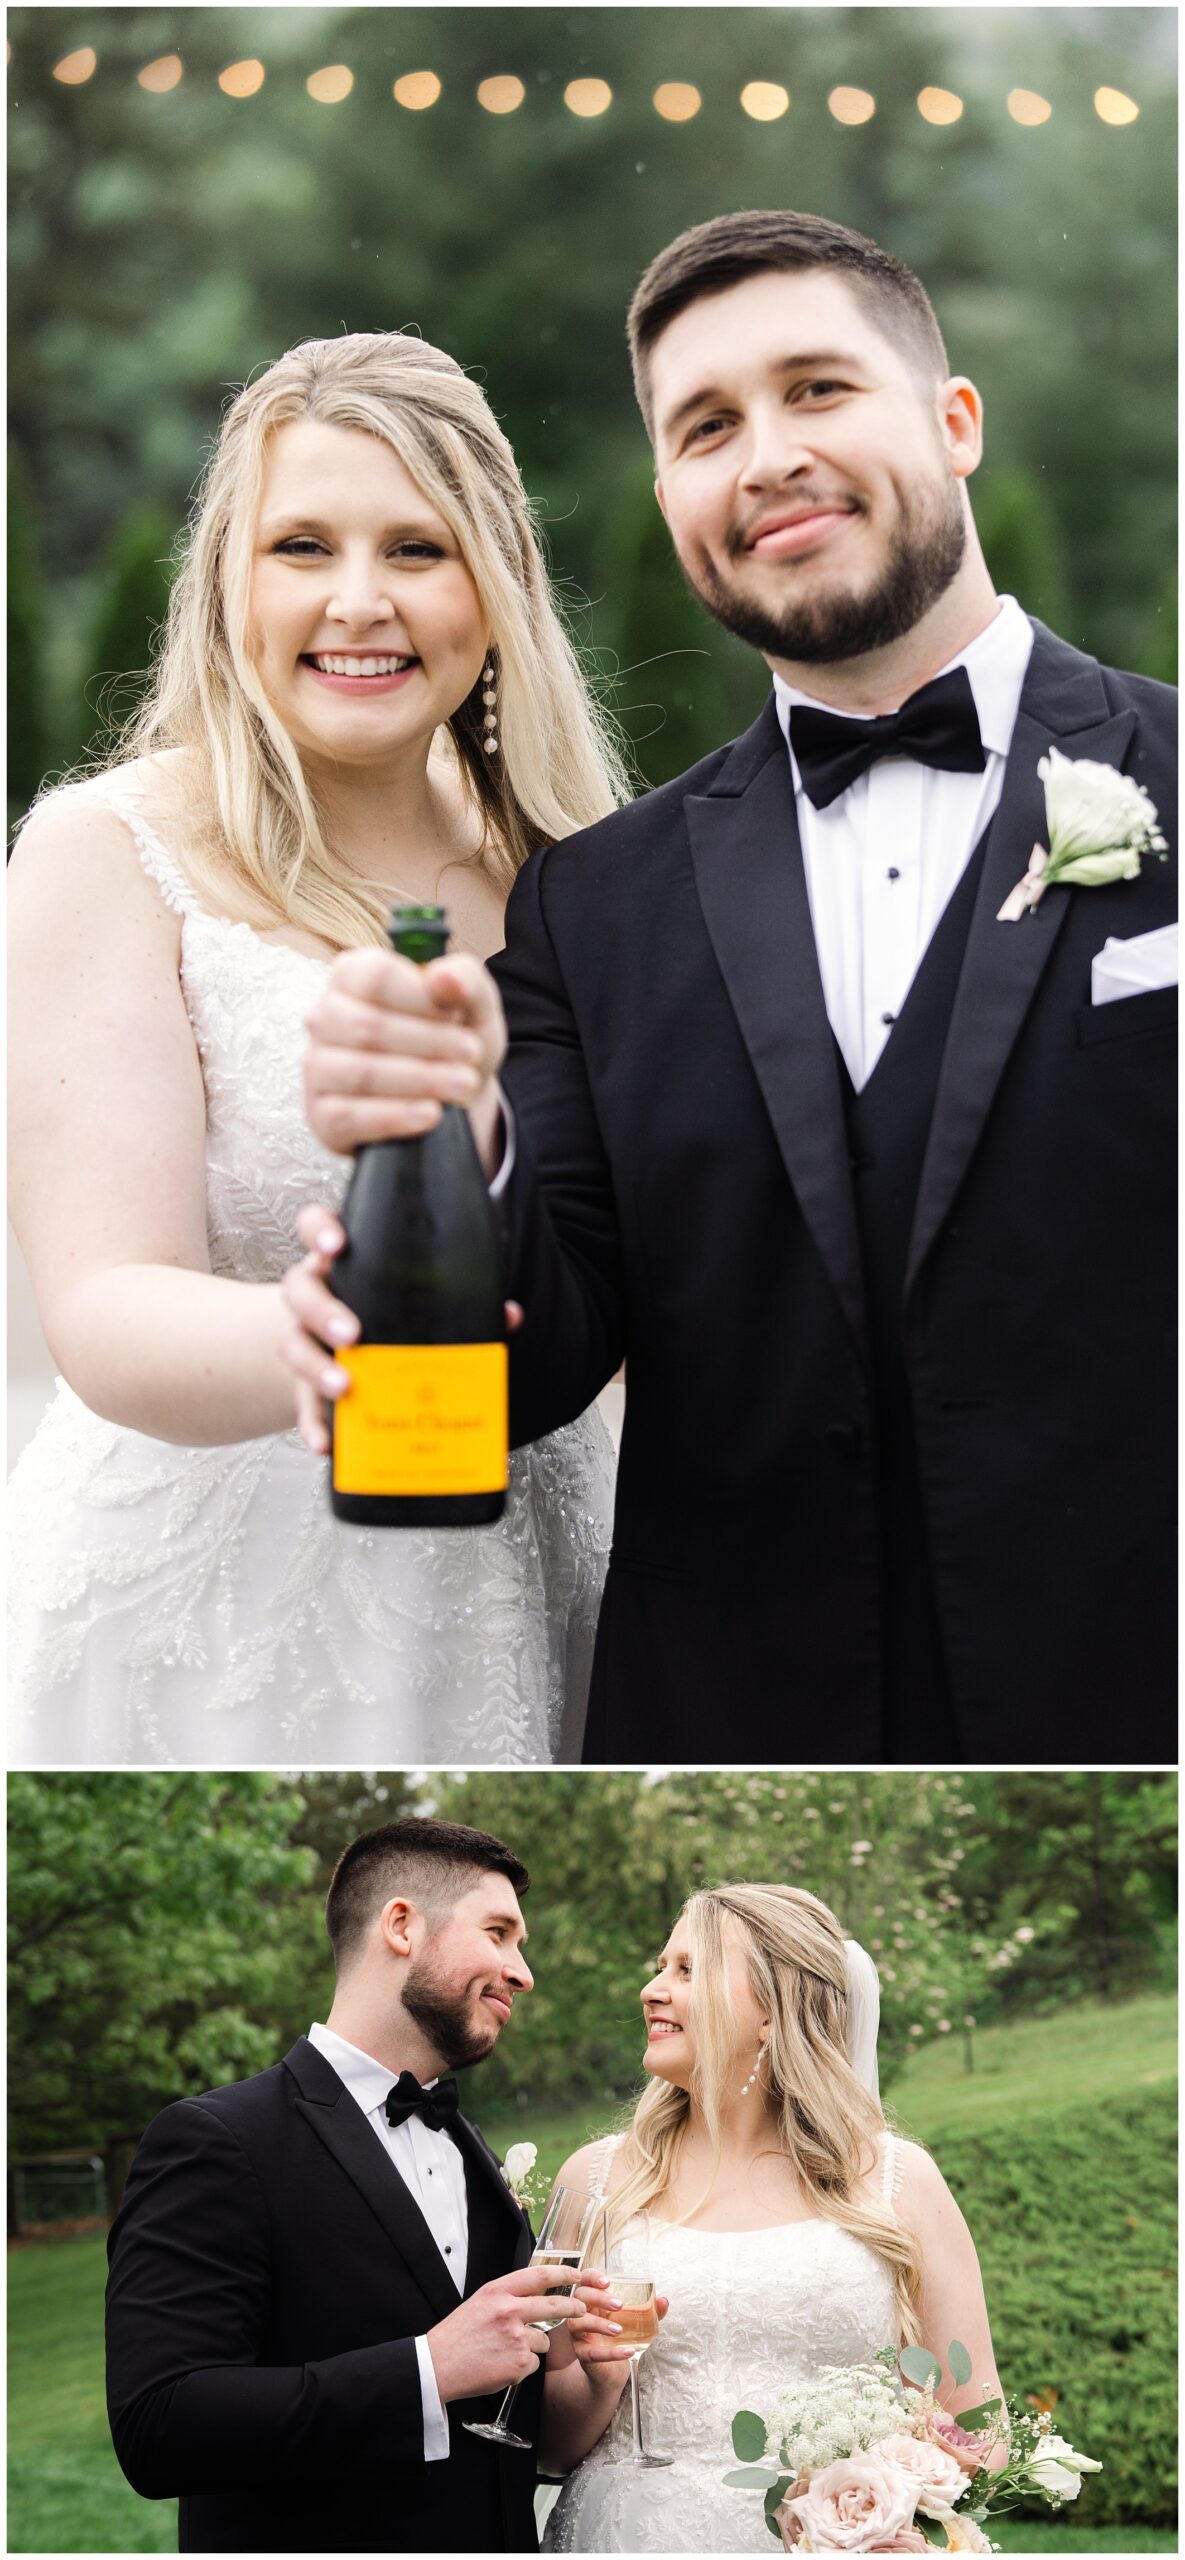 A joyful bride and groom outdoors at a mountain wedding, holding a champagne bottle and toasting with glasses, surrounded by greenery and string lights above.